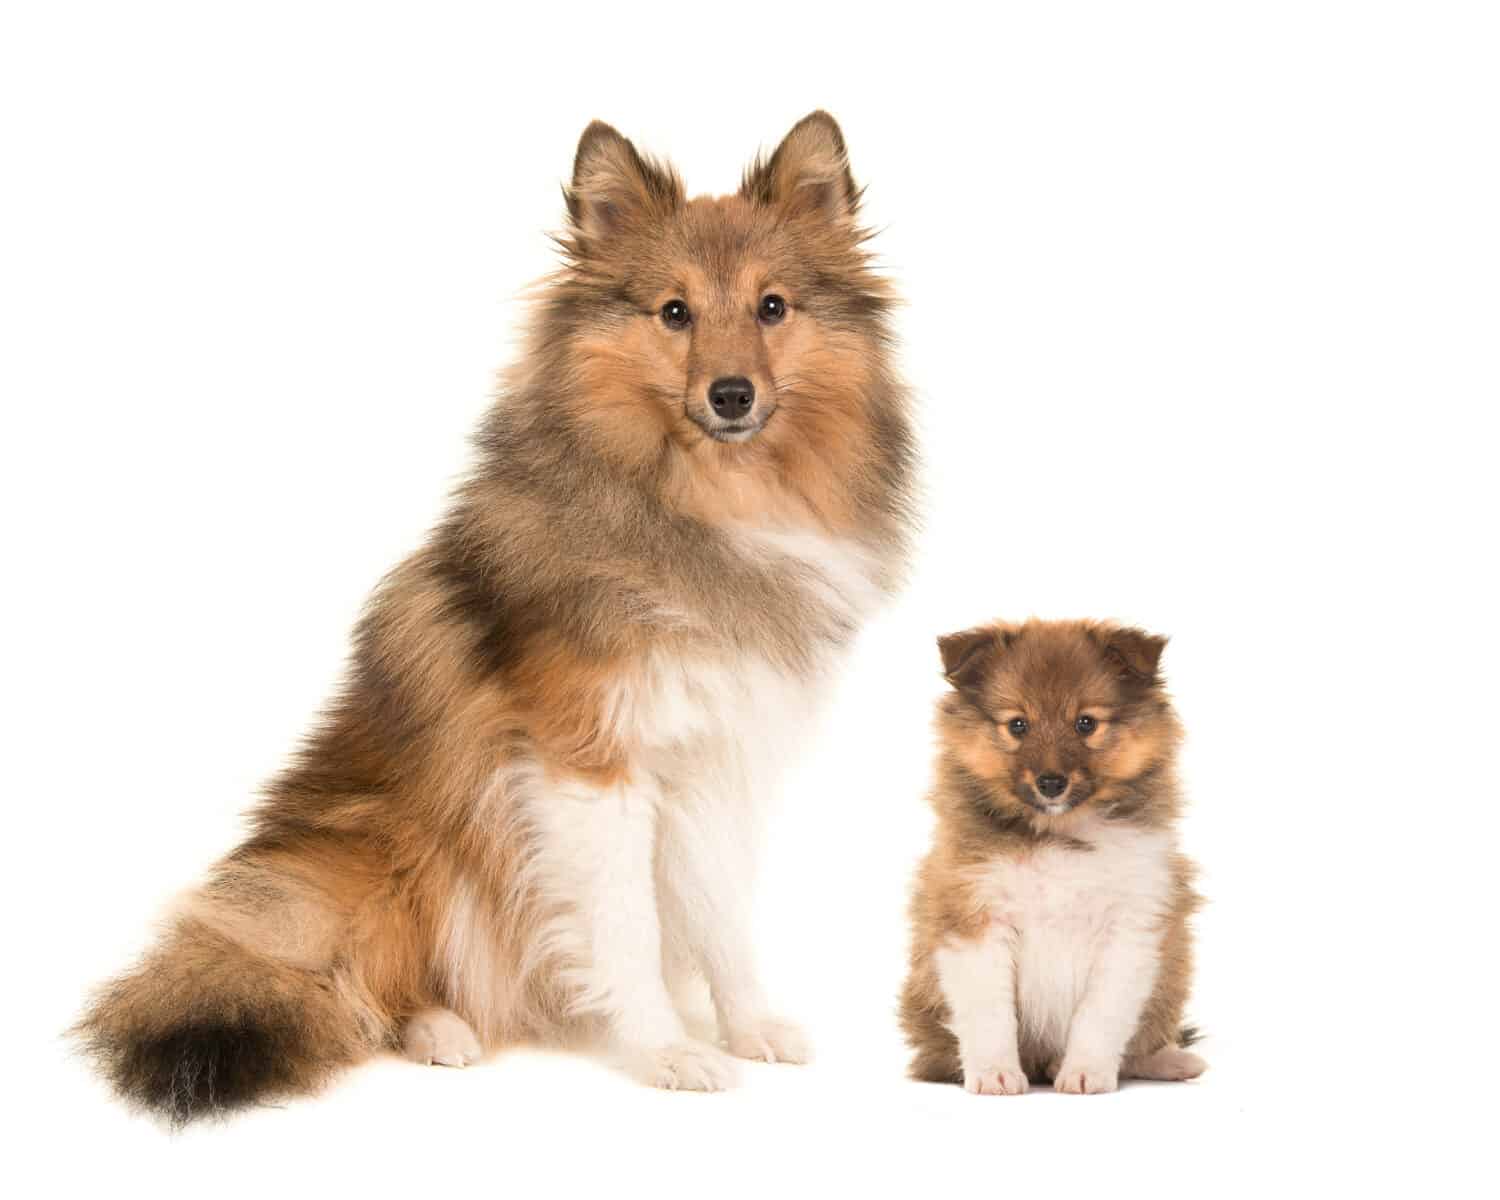 Shetland sheepdog adult and puppy sitting next to eachother facing the camera isolated on a white background